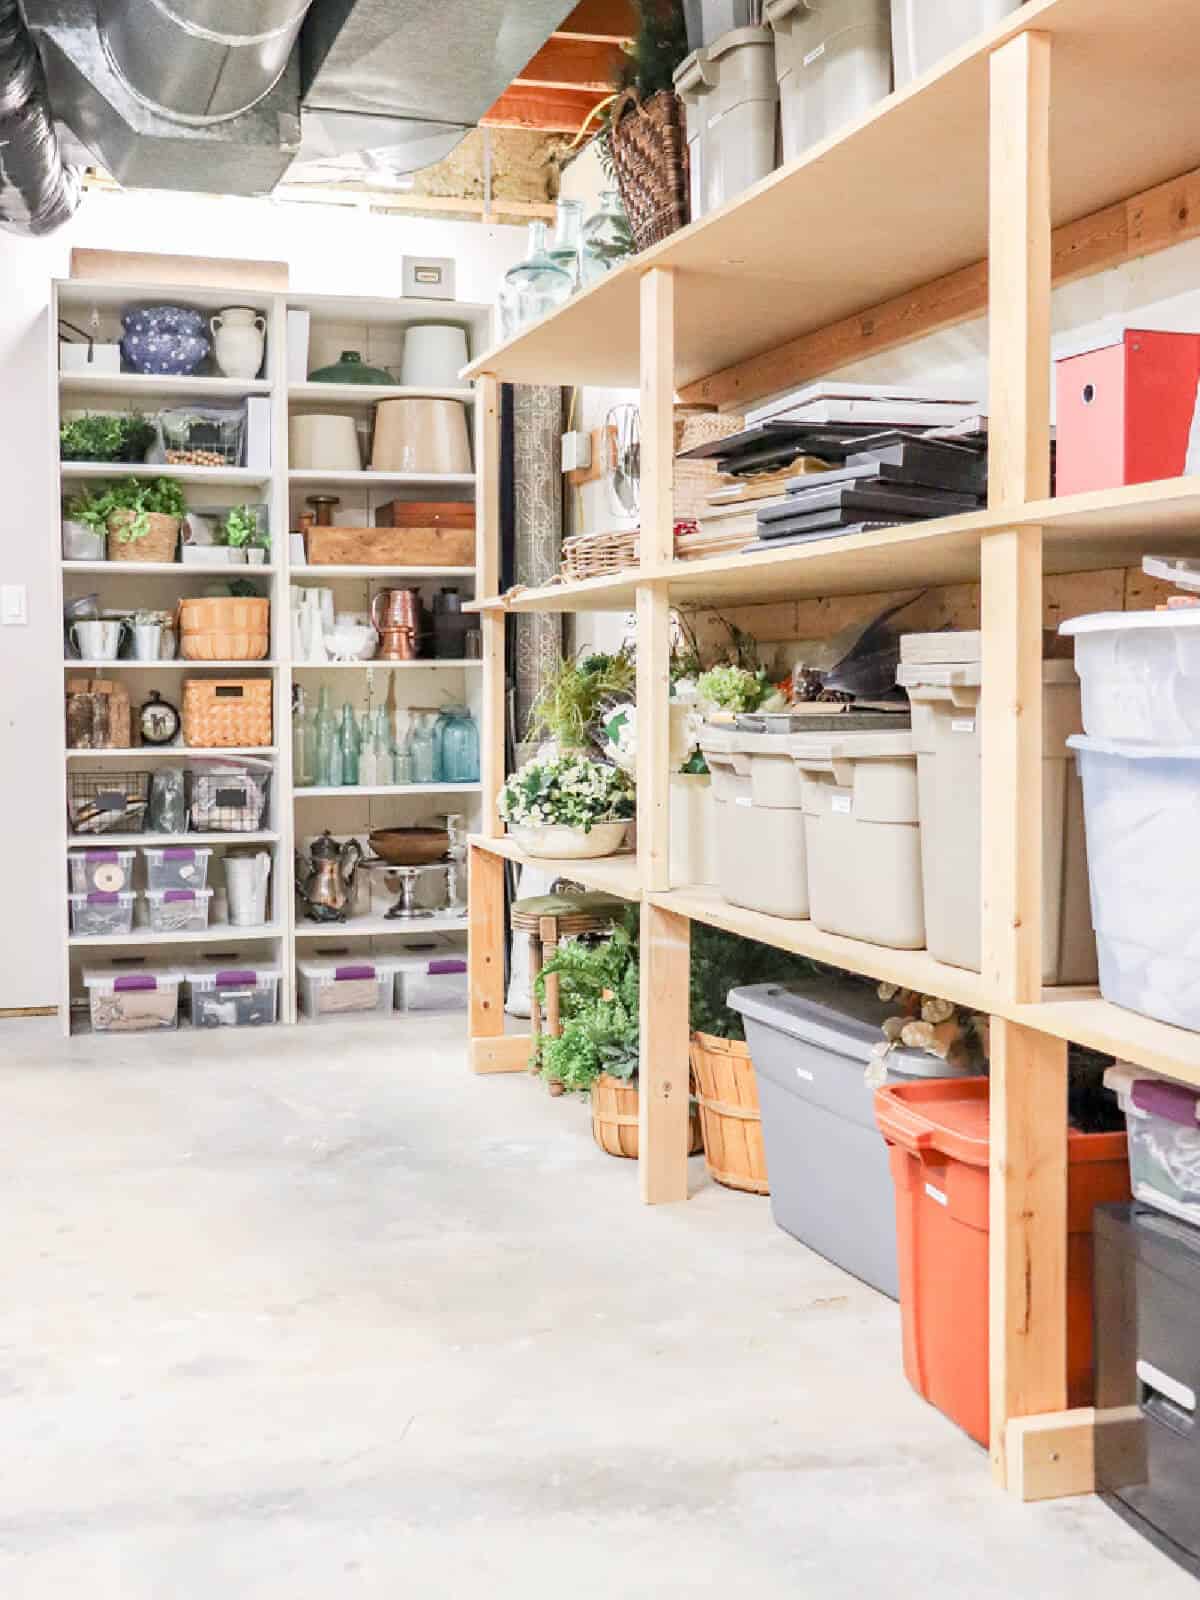 How to Make Over and Organize a Storage Room